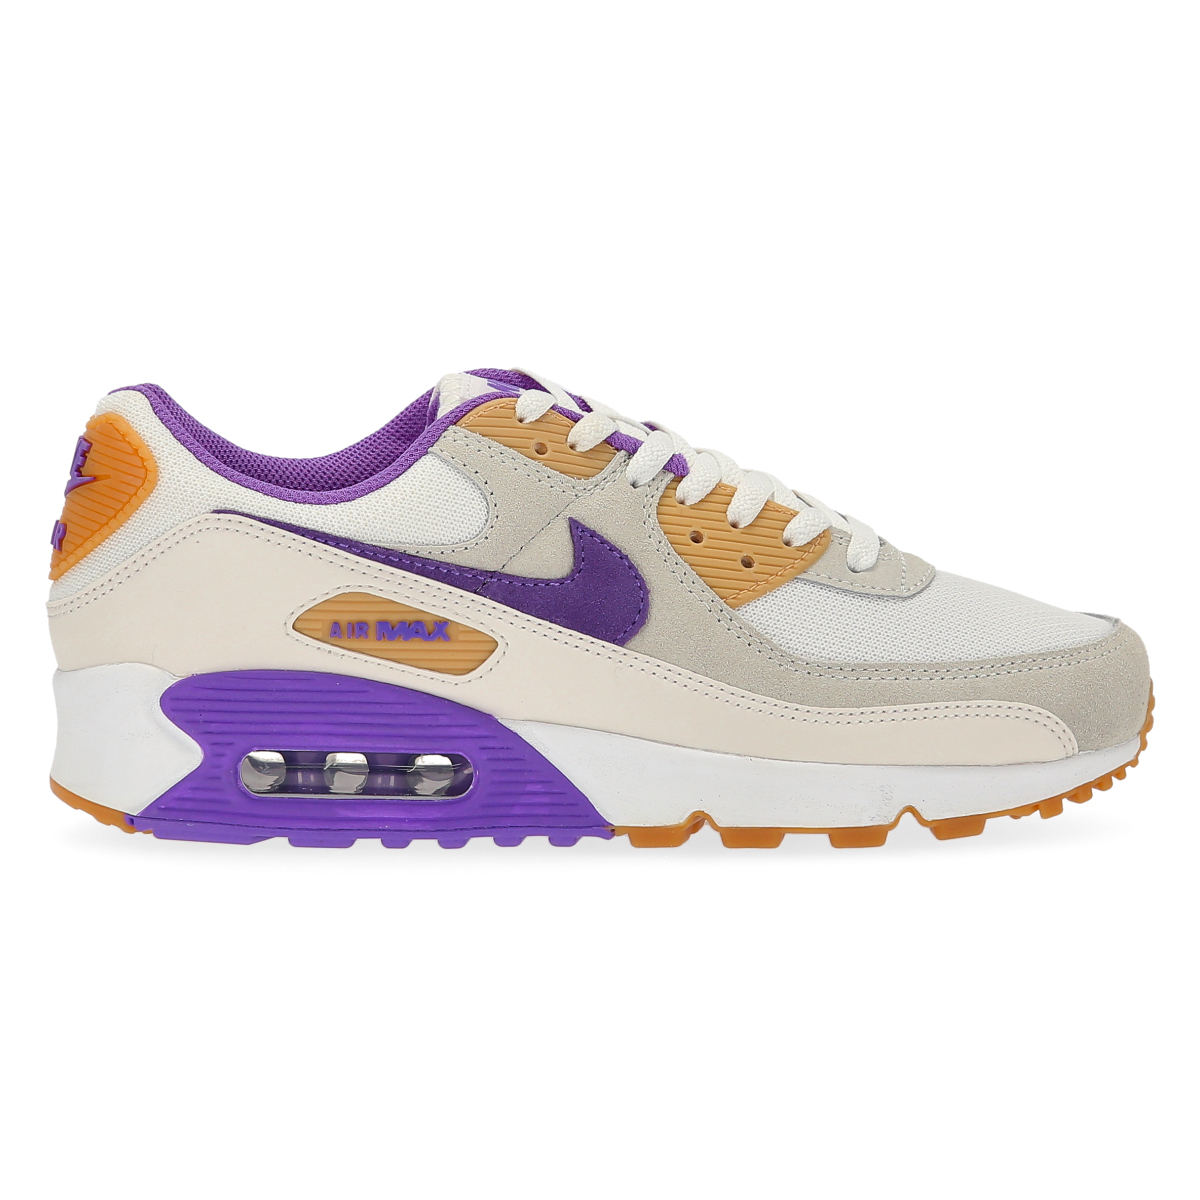 Zapatillas Nike Air Max 90 Hombre,  image number null